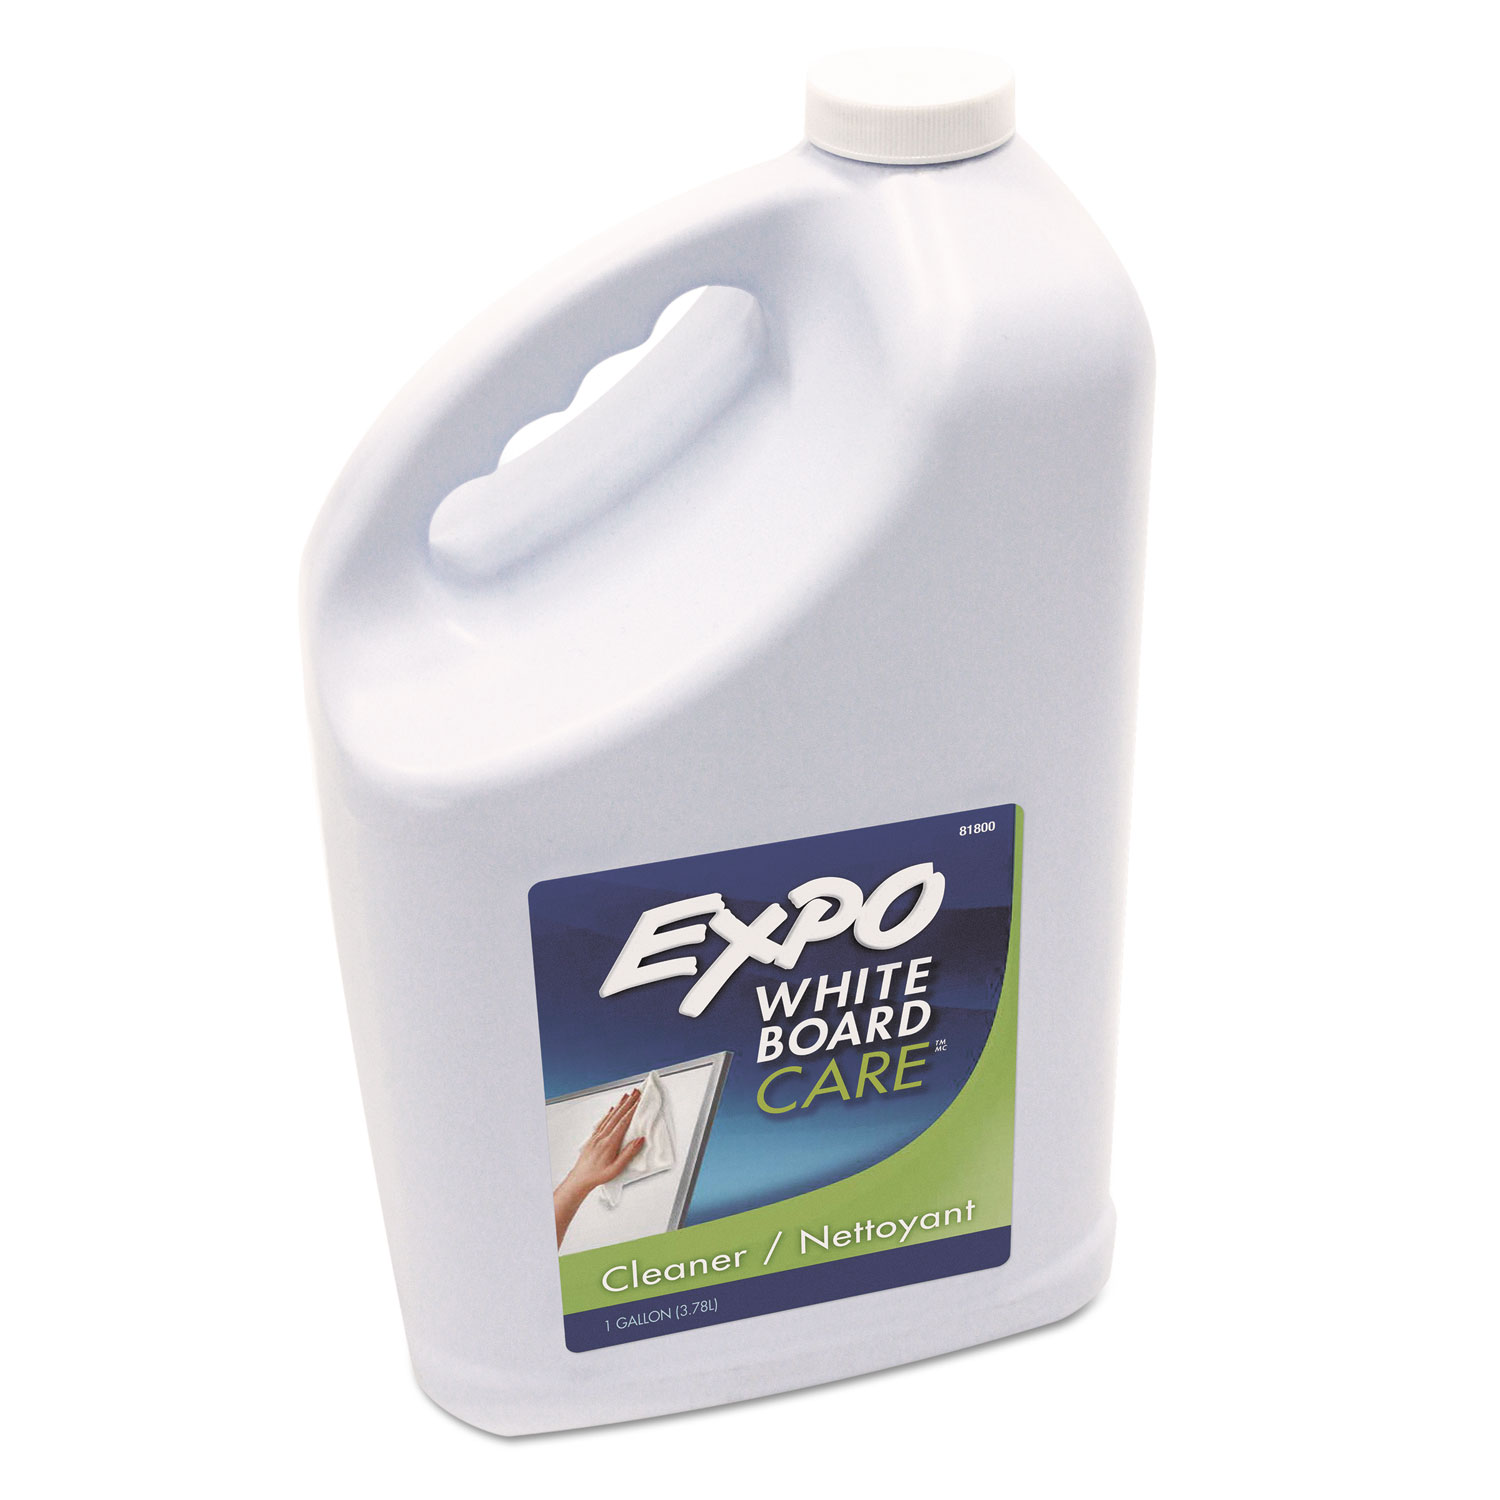  EXPO 81800 Dry Erase Surface Cleaner, 1gal Bottle (SAN81800) 